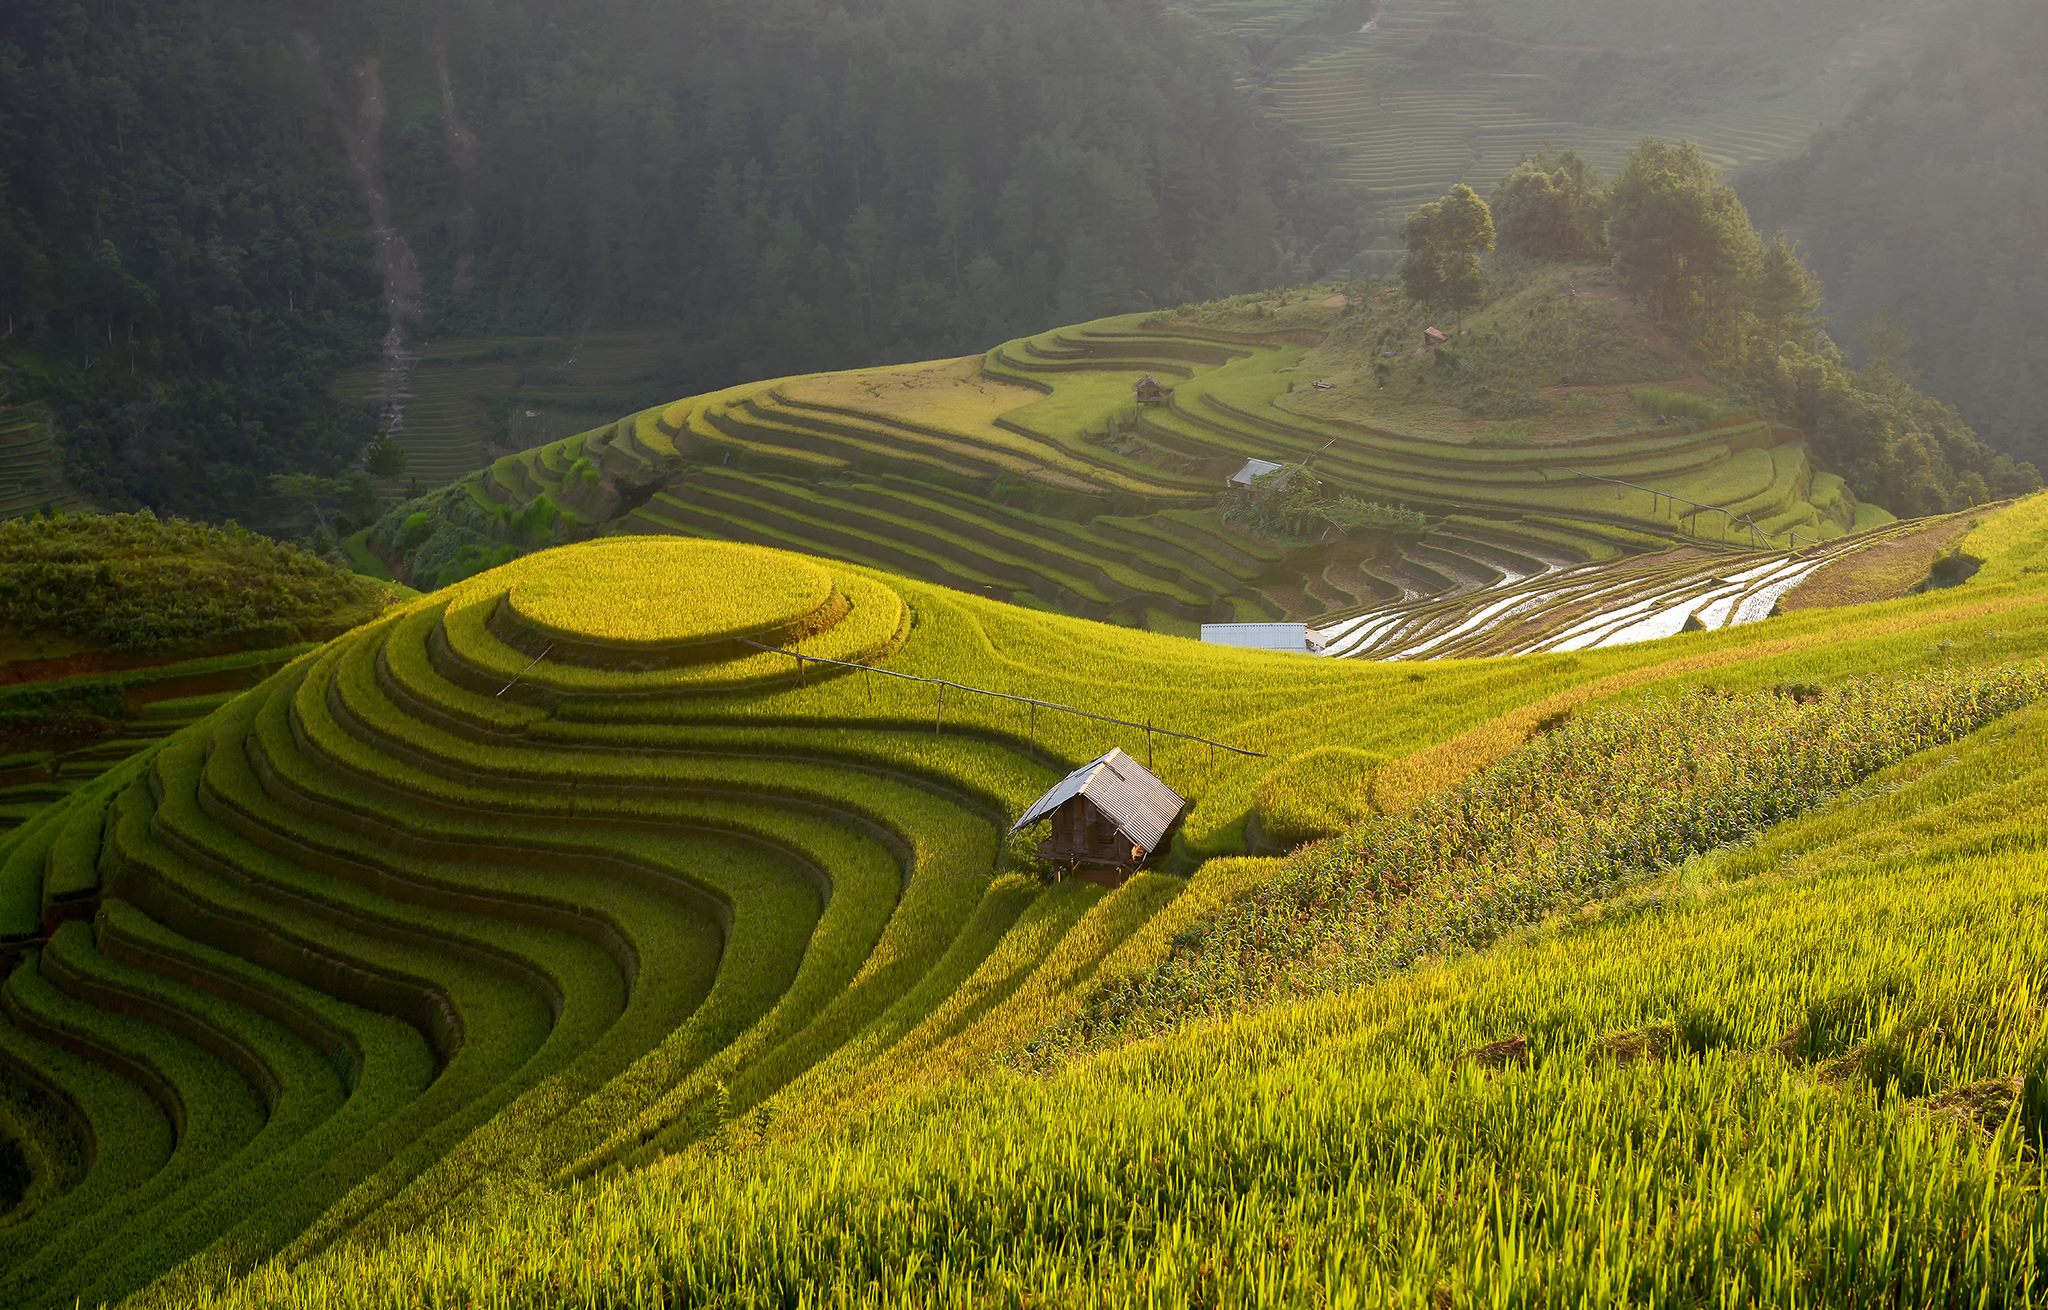 Nature, Vietnam, Agriculture, Beauty In Nature, Blue, Cloud - Sky, Color Image, Day, Green Color, Harvesting, Horizontal, Lush Foliage, No People, North Vietnam, Outdoors, Photography, Rice - Cereal Plant, Rice Paddy, Scenics, Seasoning, Terraced Field, T, sarawut intarob